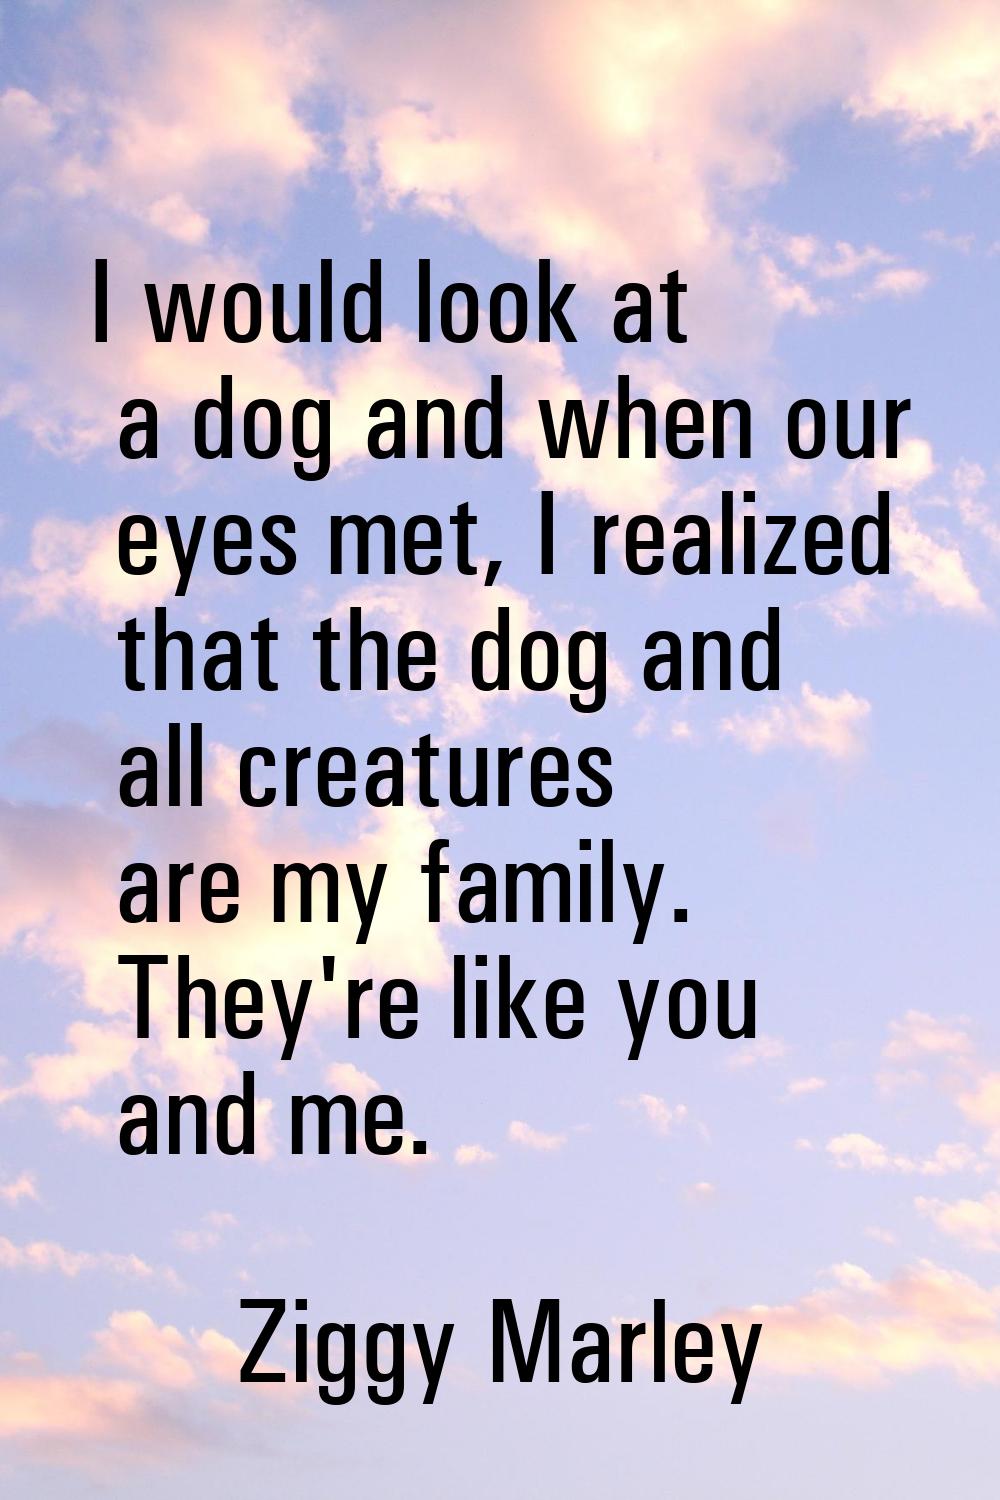 I would look at a dog and when our eyes met, I realized that the dog and all creatures are my famil